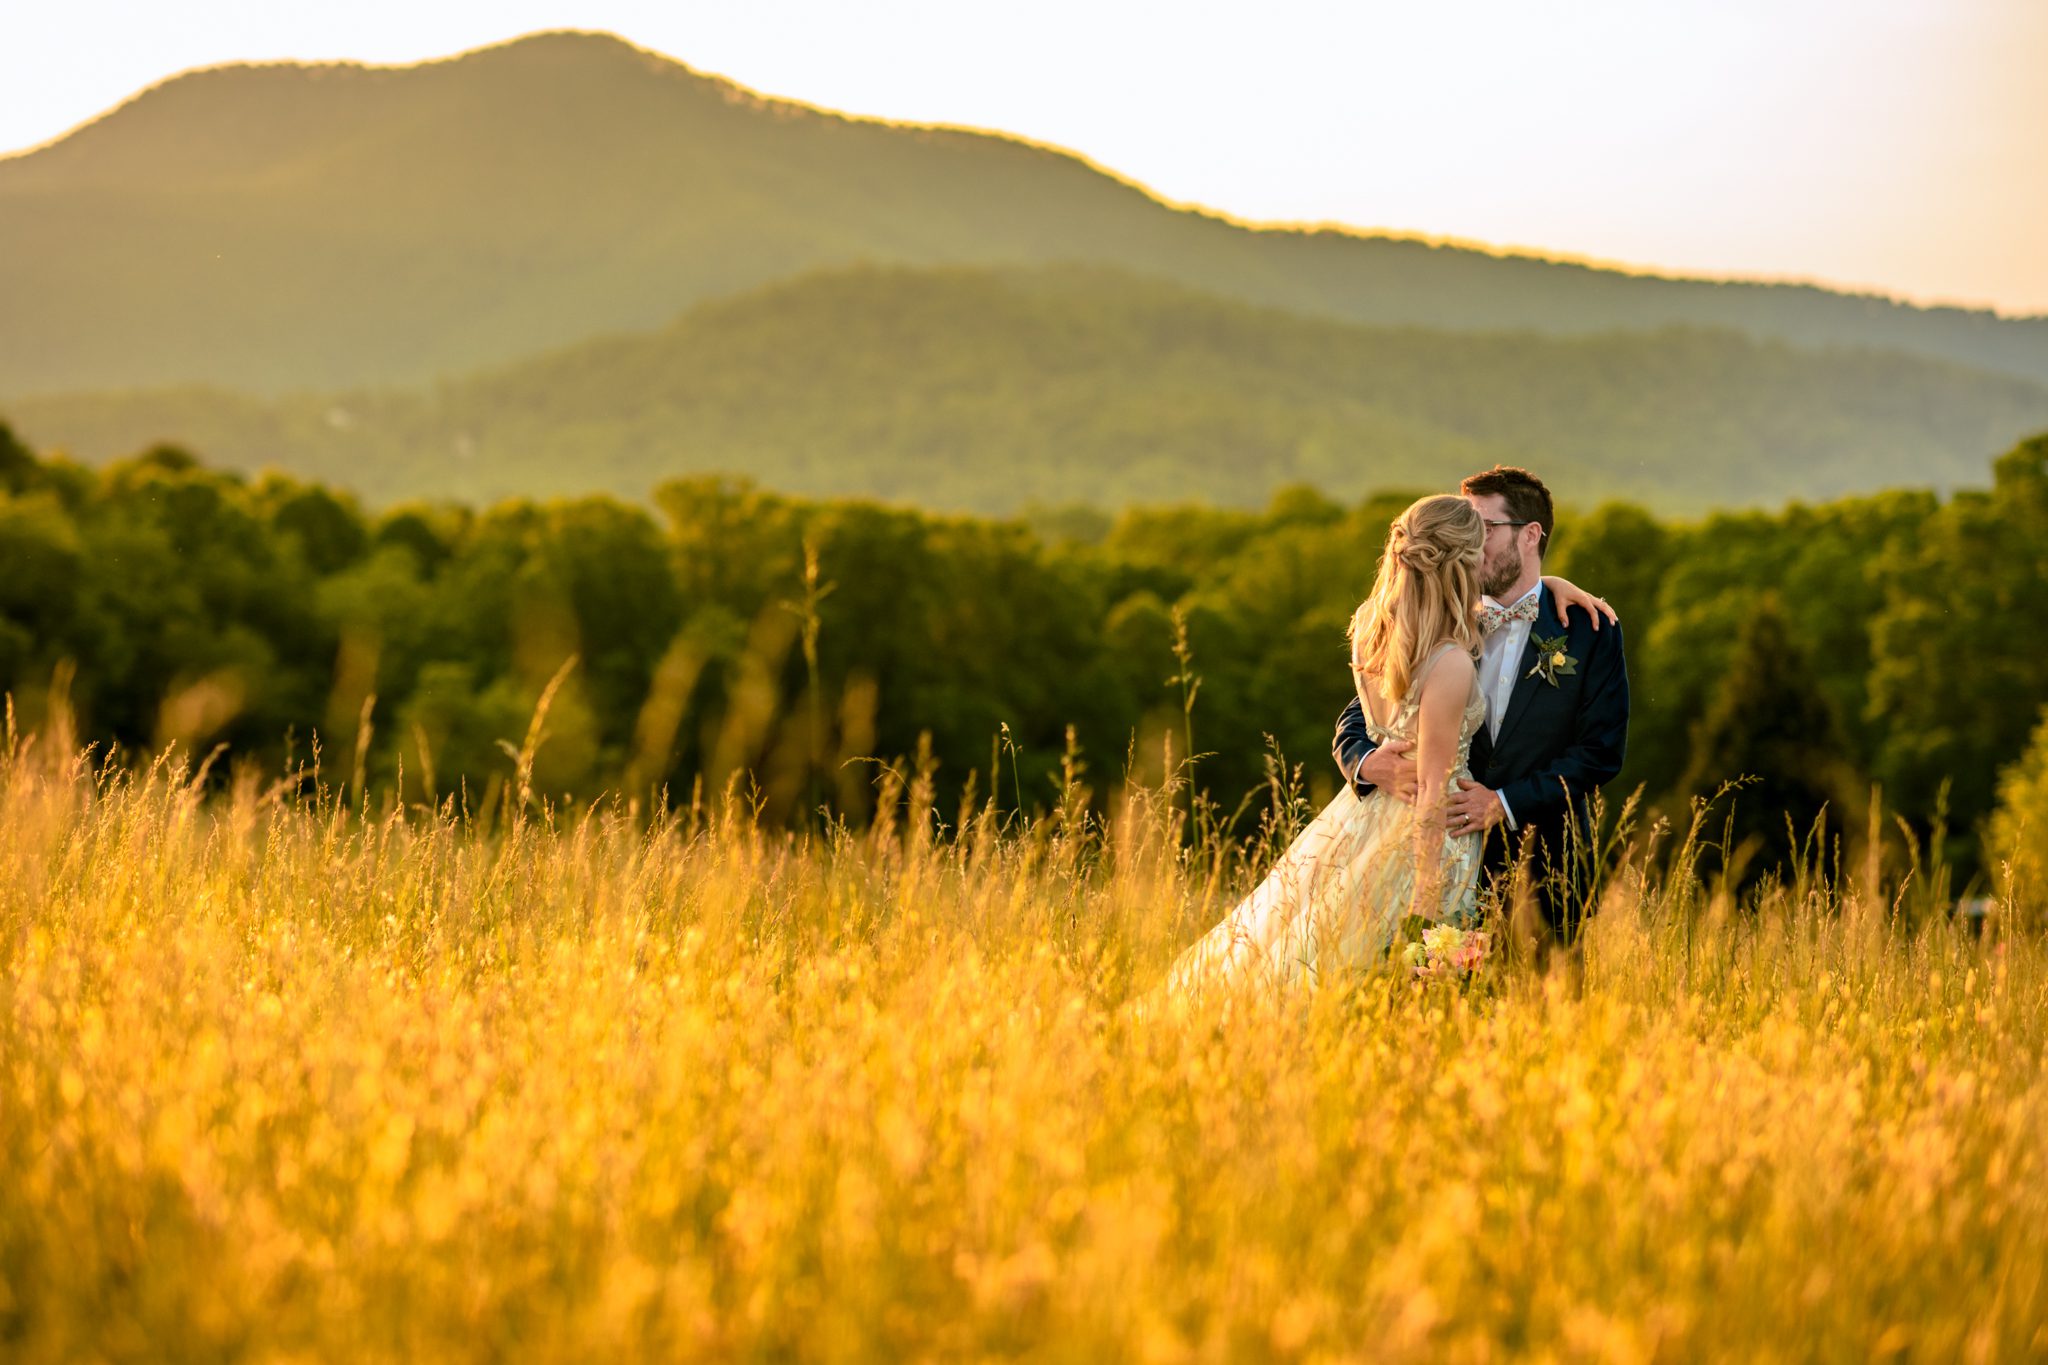 A bride and groom kissing in a field with mountains in the background.